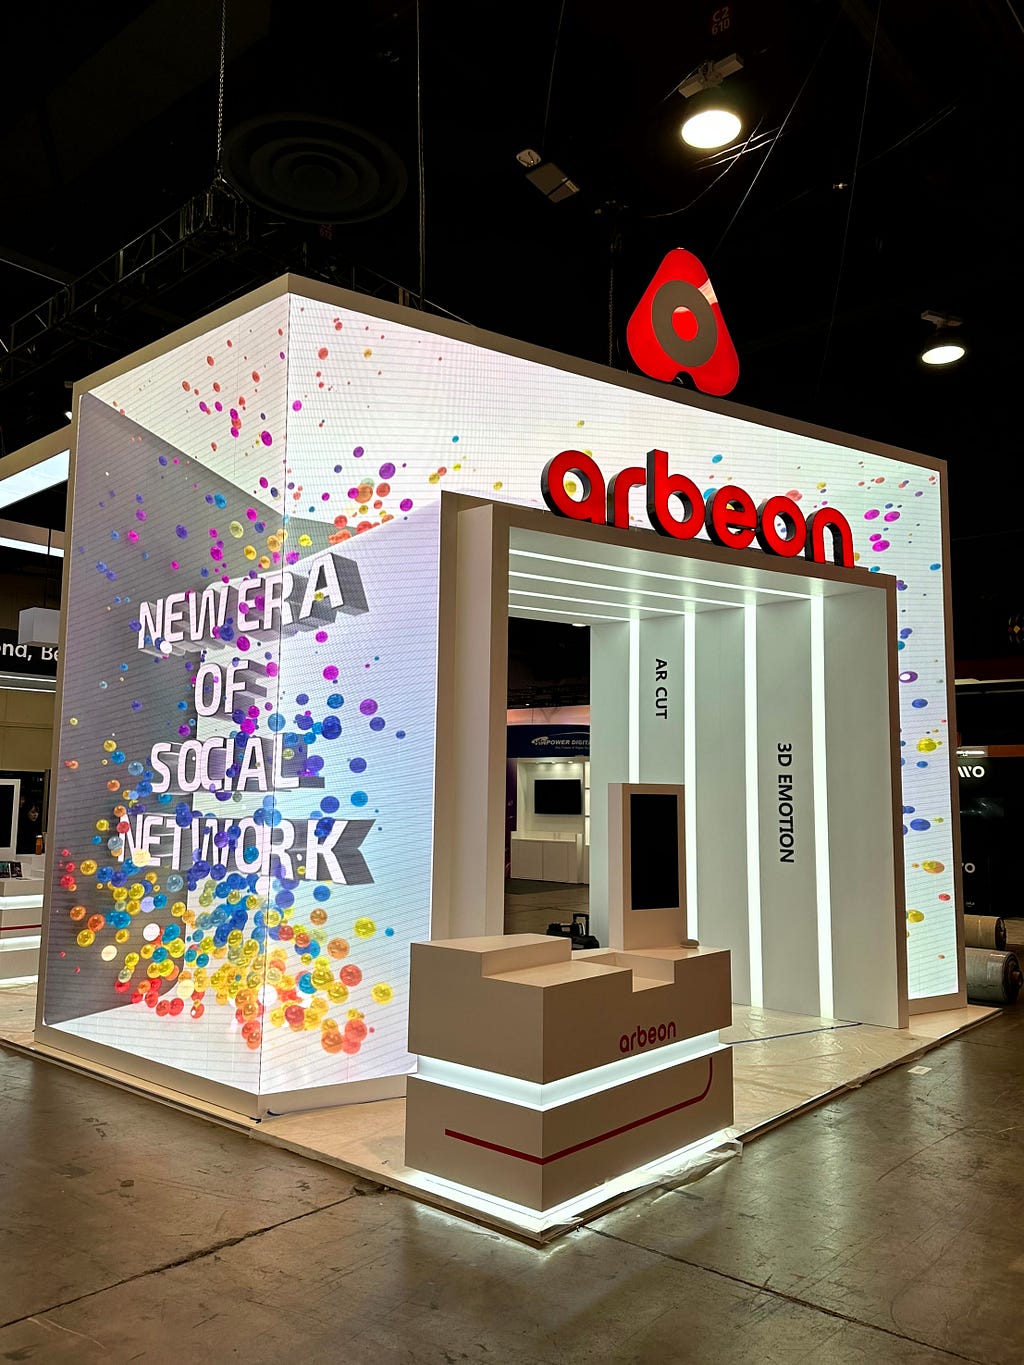 Arbeon attended CES2023